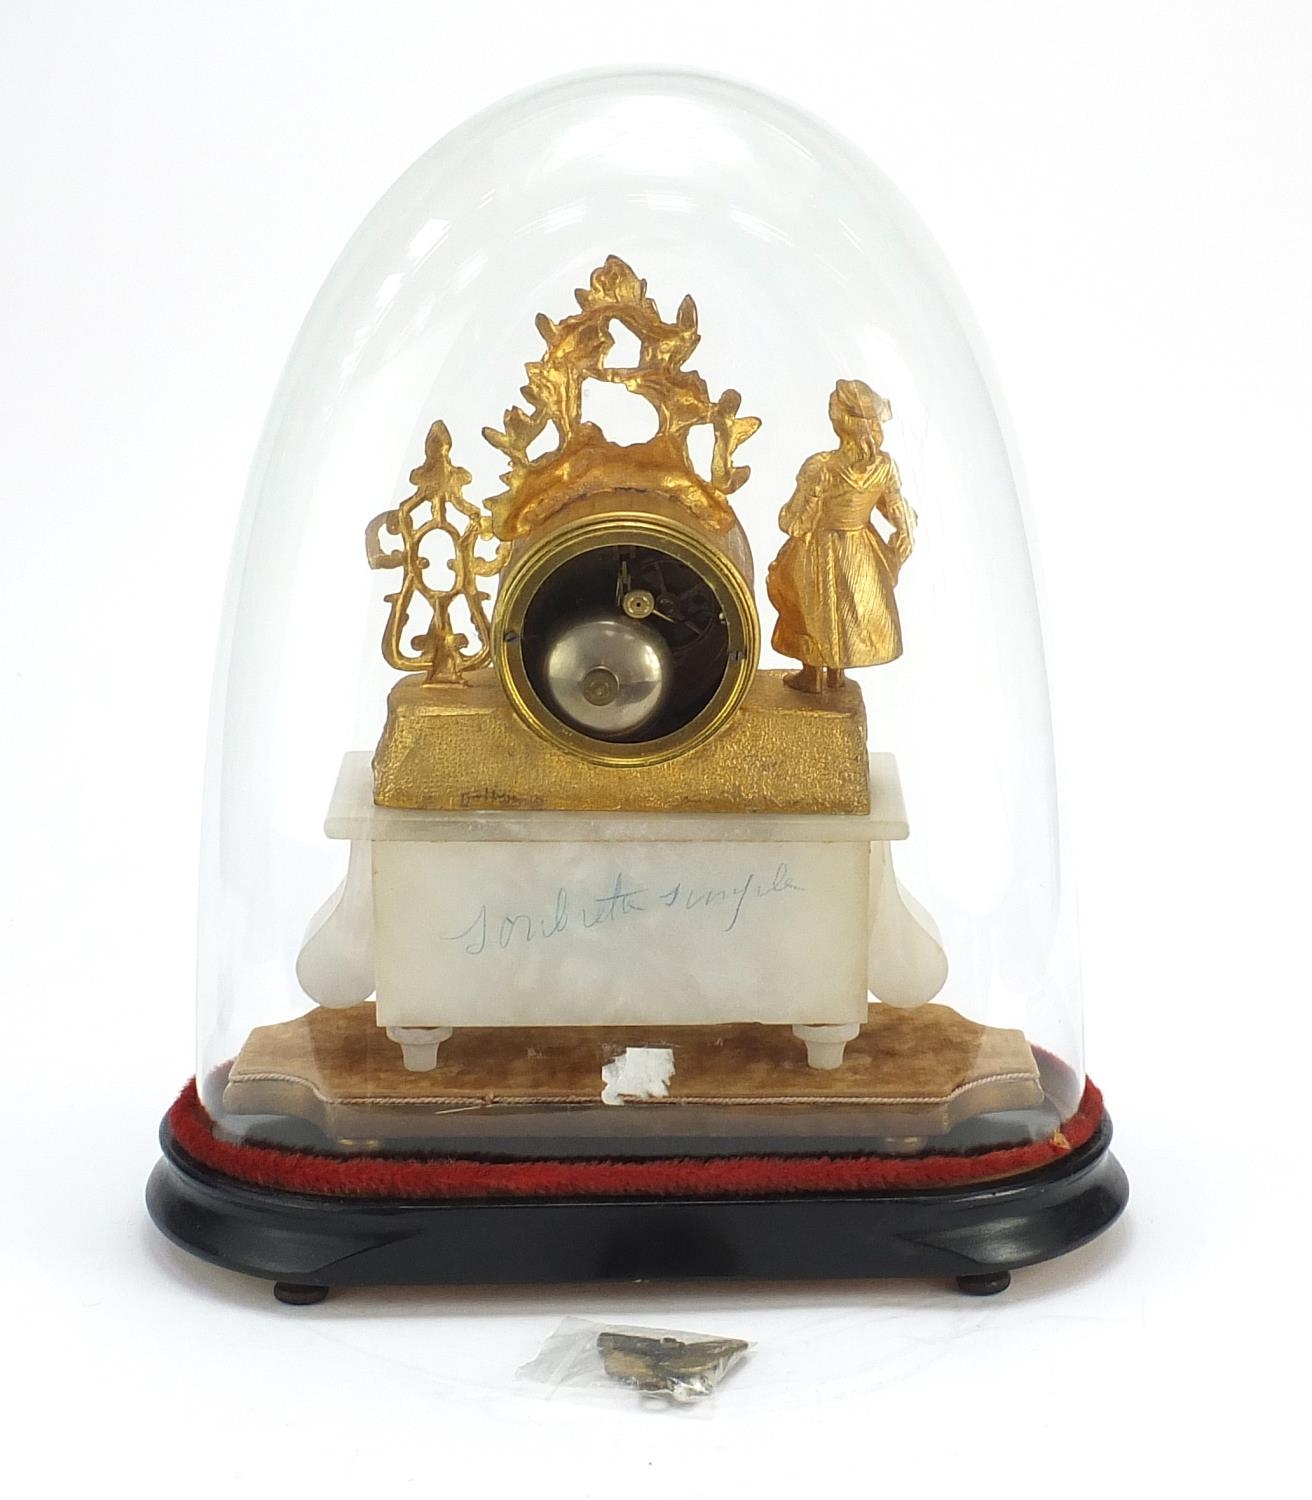 19th century French gilt metal and onyx figural mantle clock raised on a gilt plinth base, housed in - Image 4 of 6